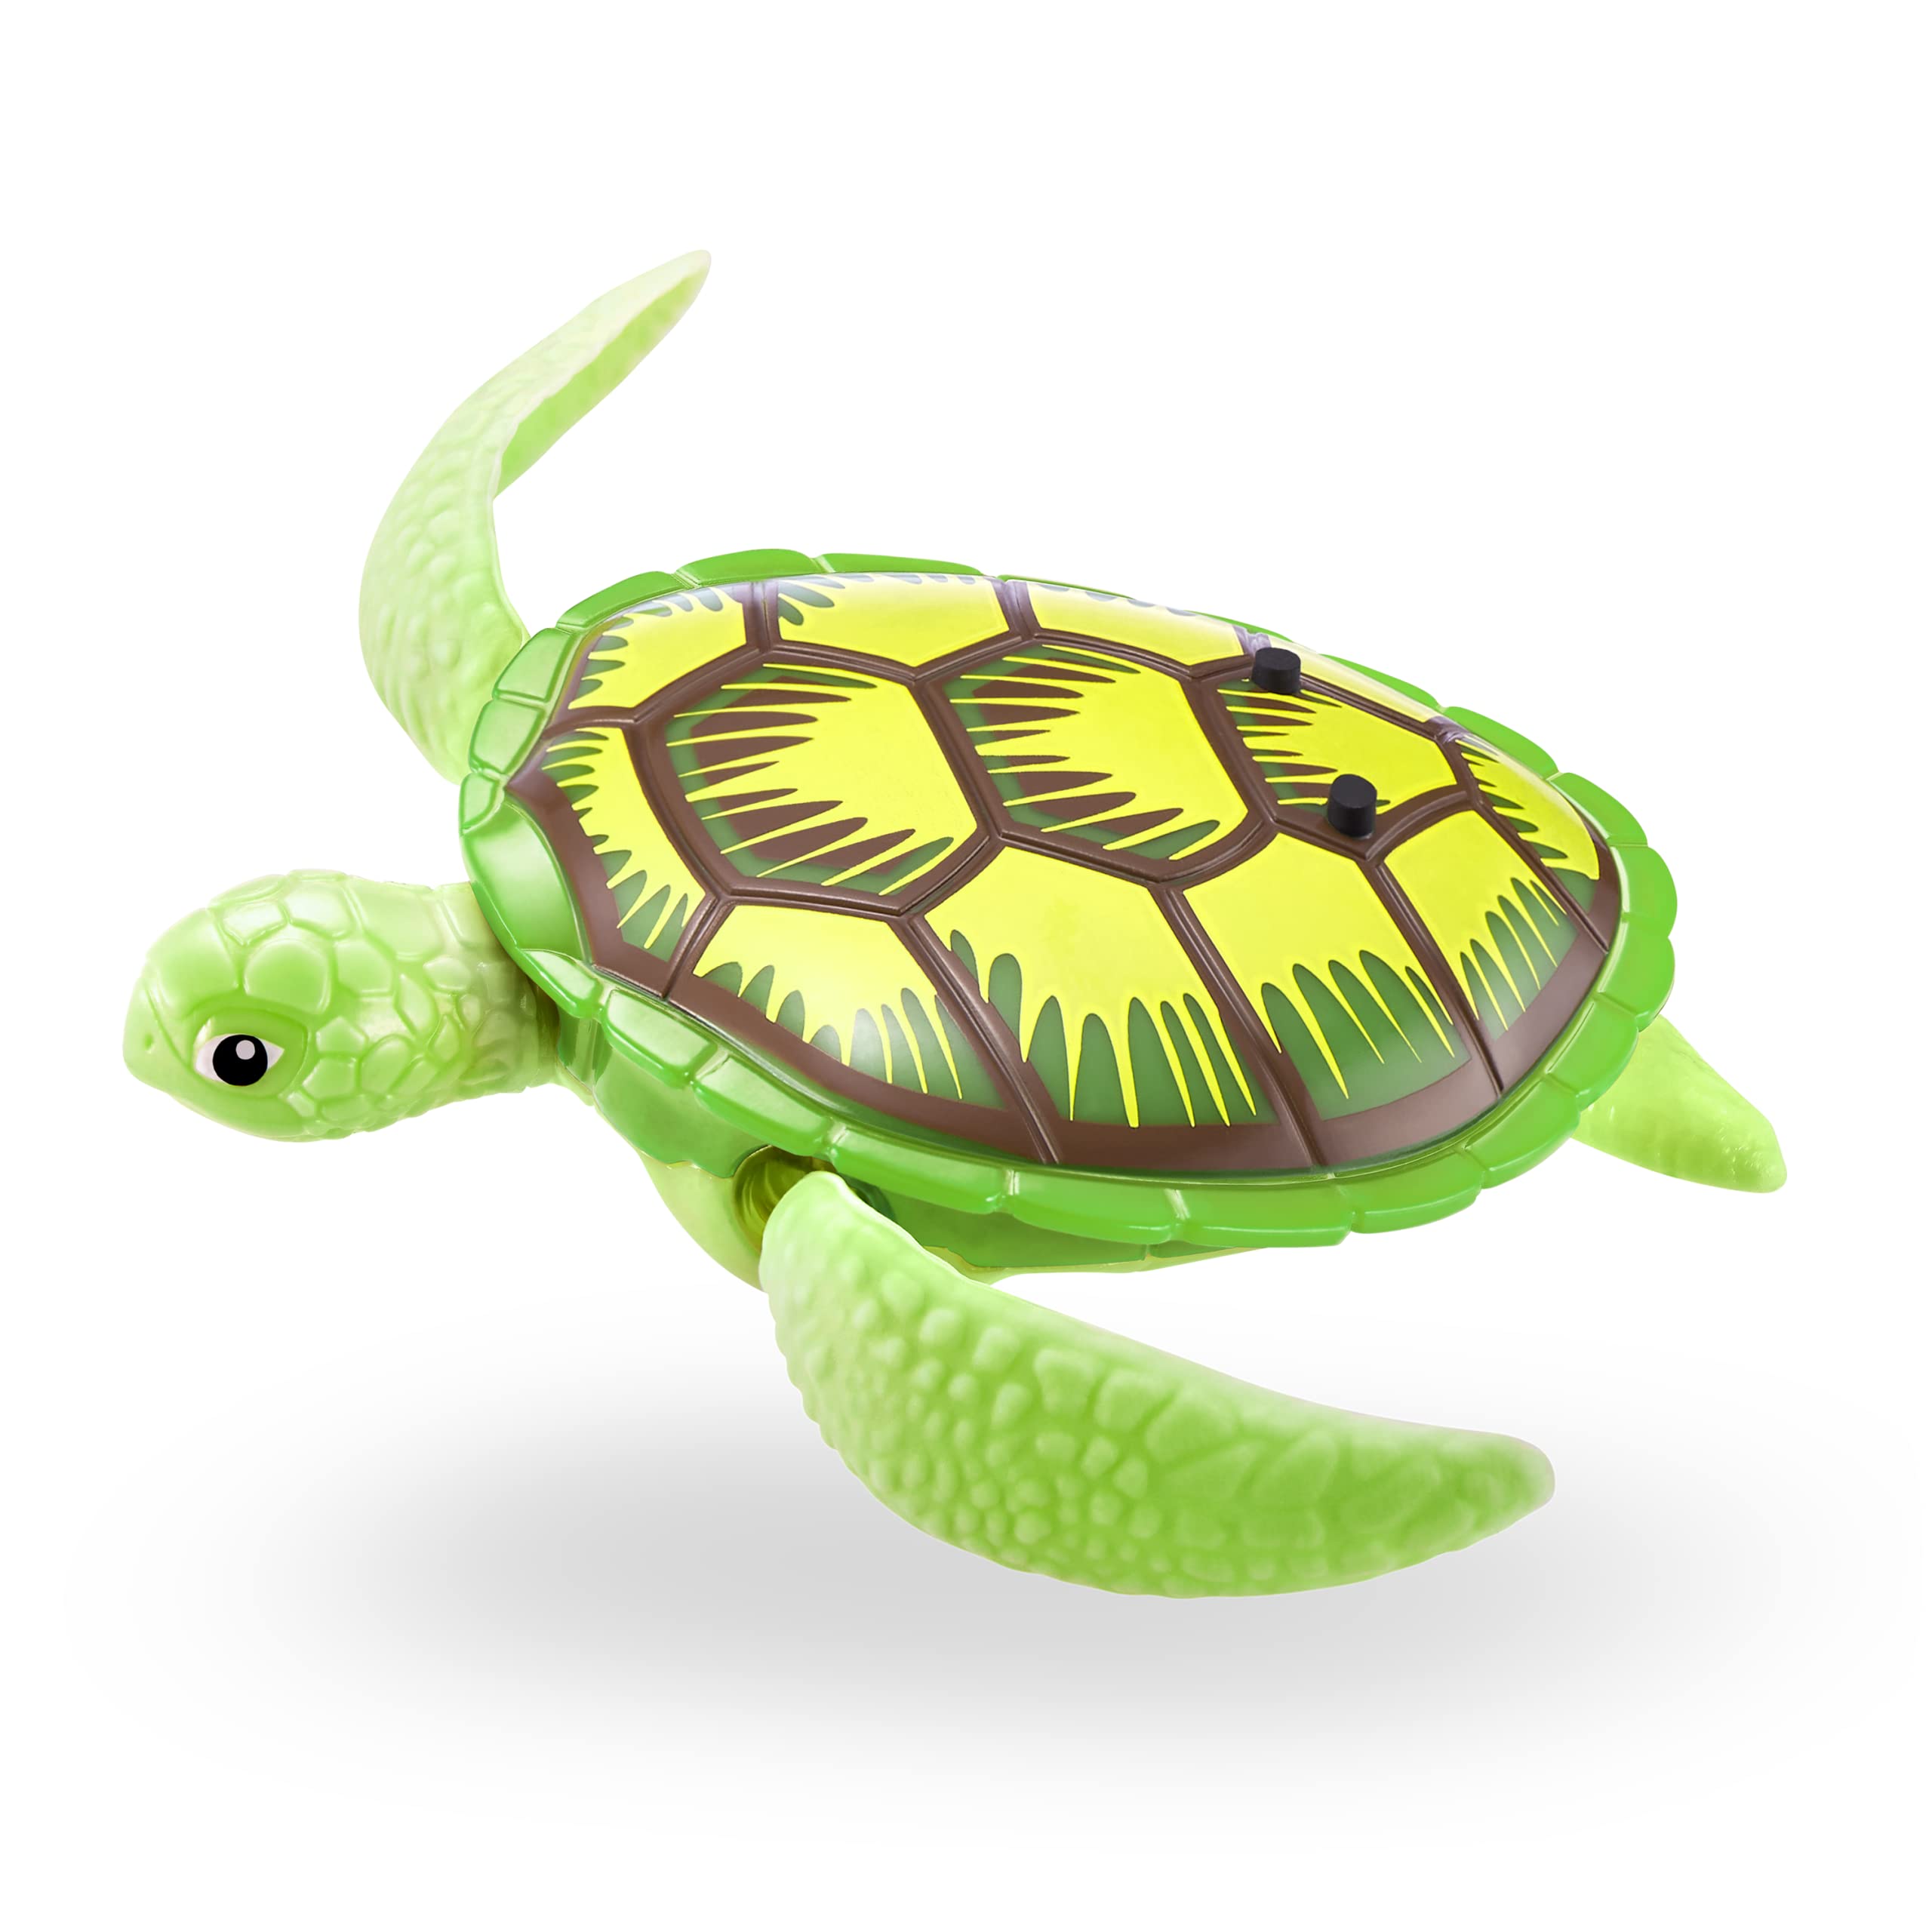 Robo Alive Robo Turtle Robotic Swimming Turtle (Green + Pink) by ZURU Water Activated, Comes with Batteries, Exclusive (2 Pack)